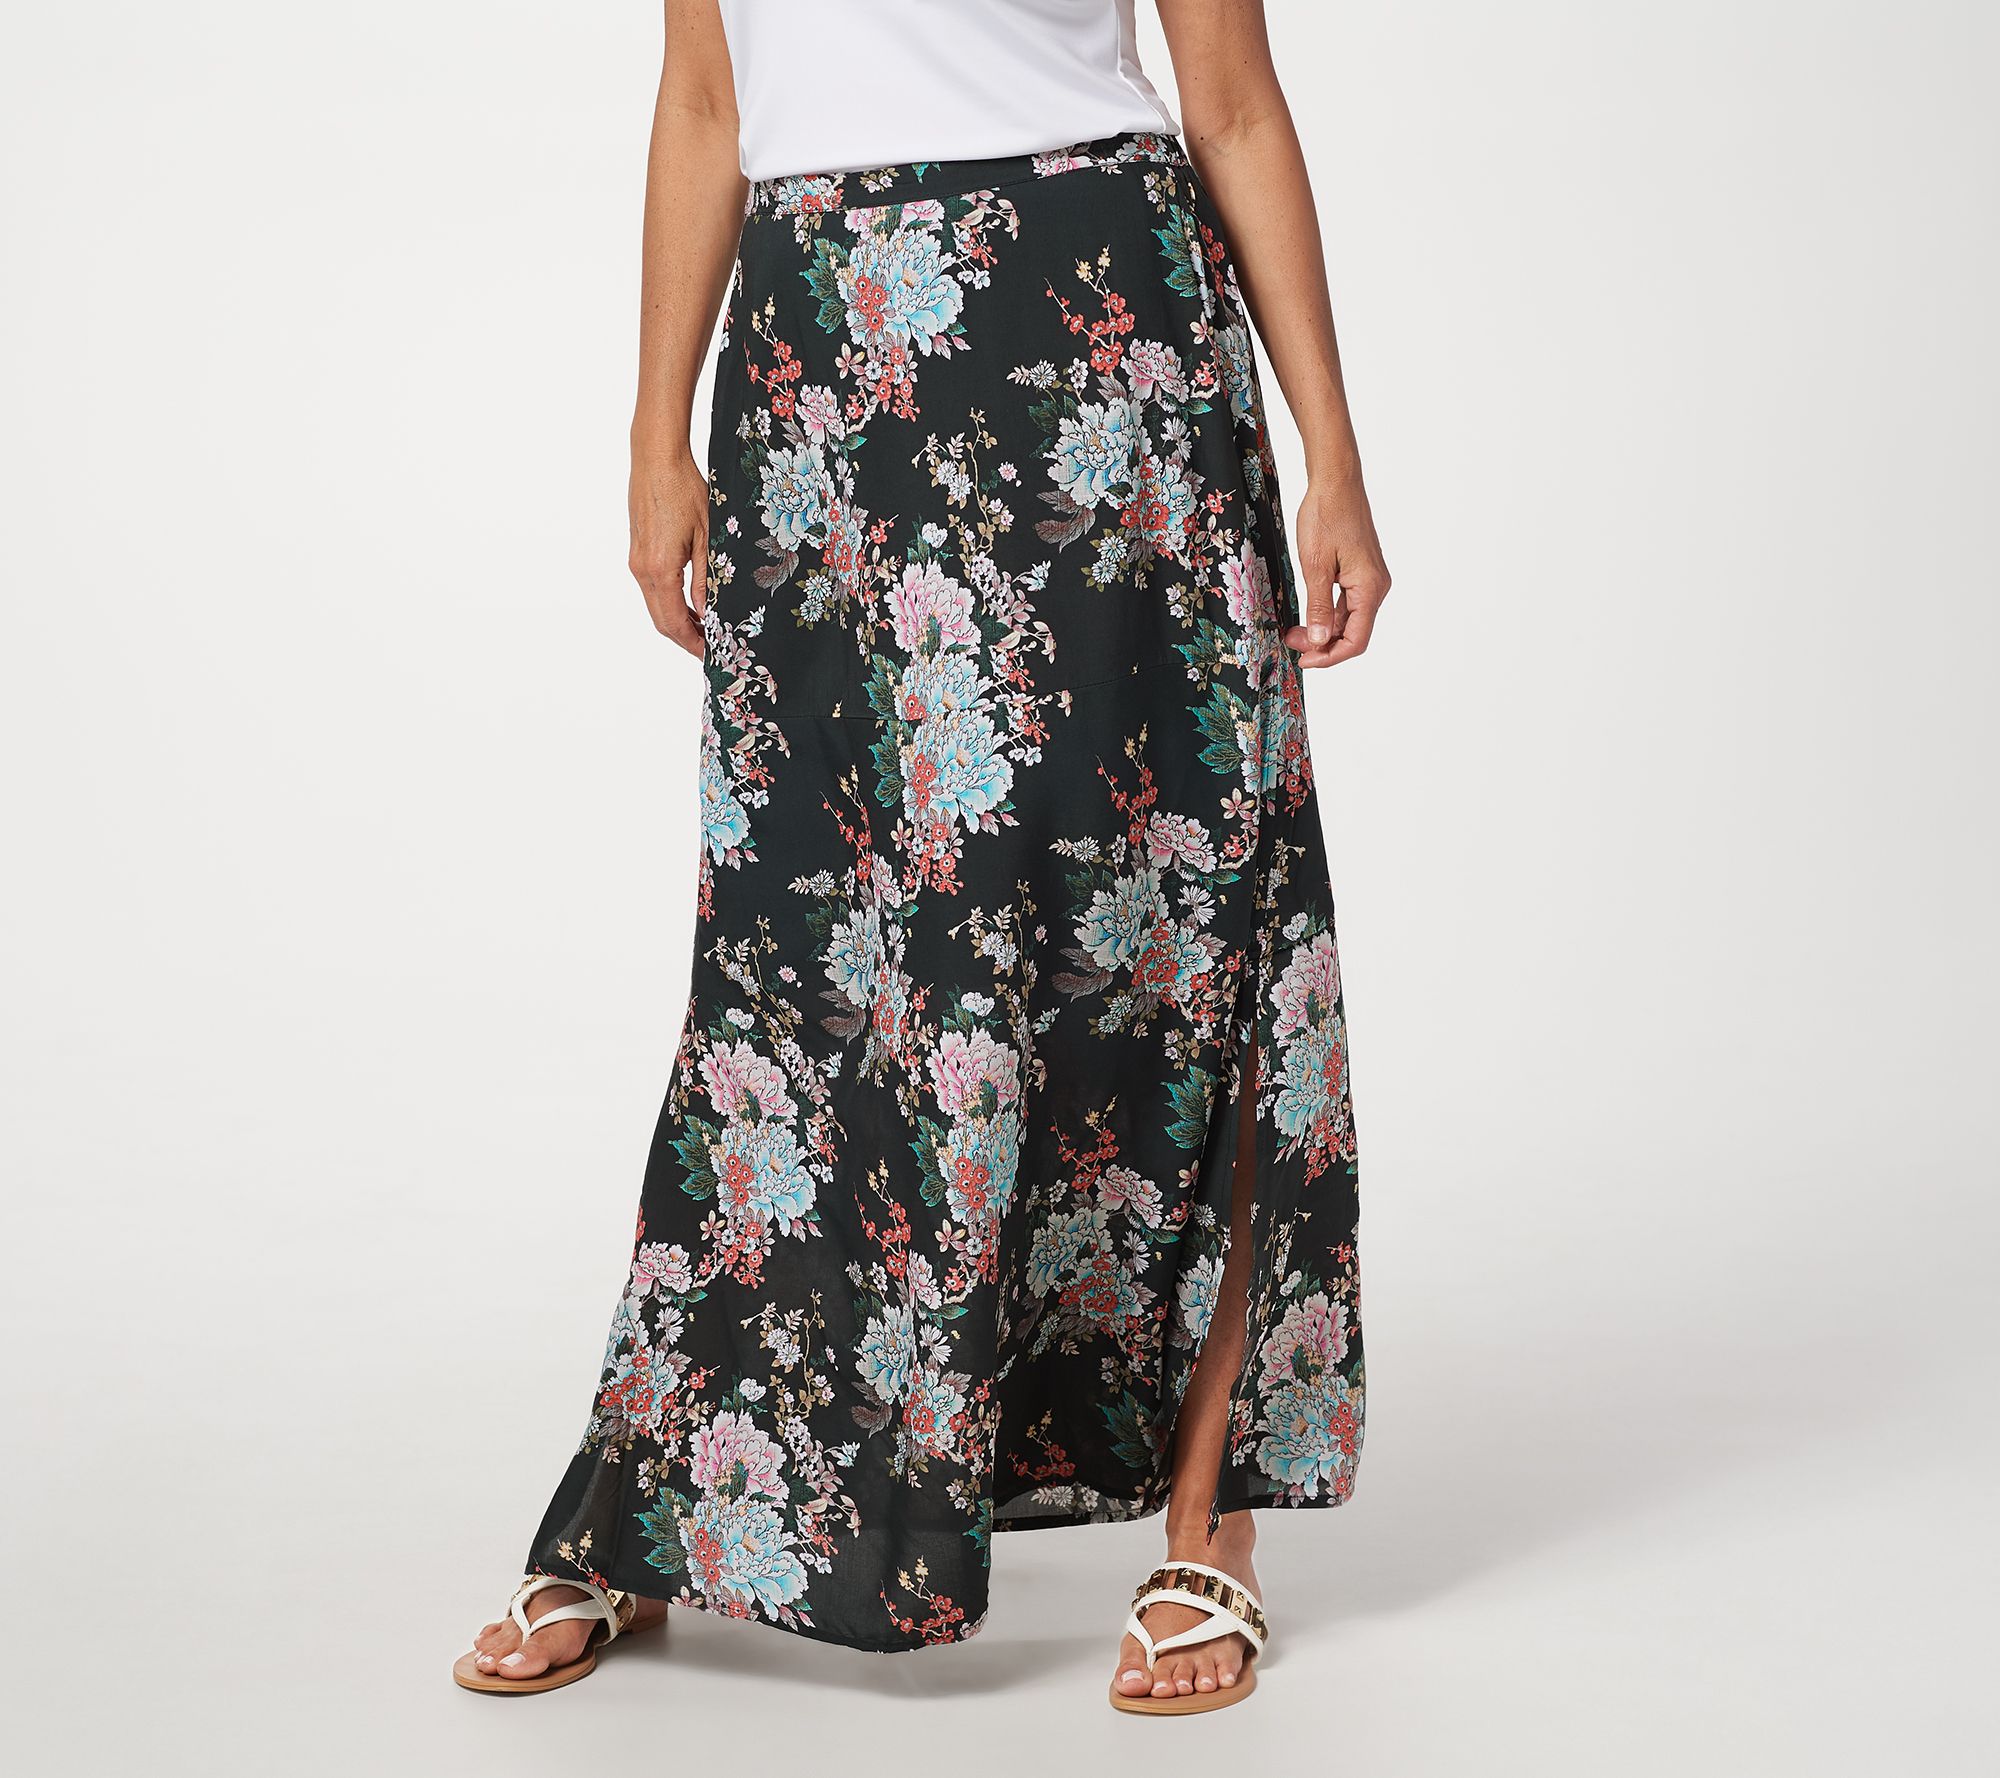 Tolani Collection Regular Printed Pull-On Woven Maxi Skirt - QVC.com